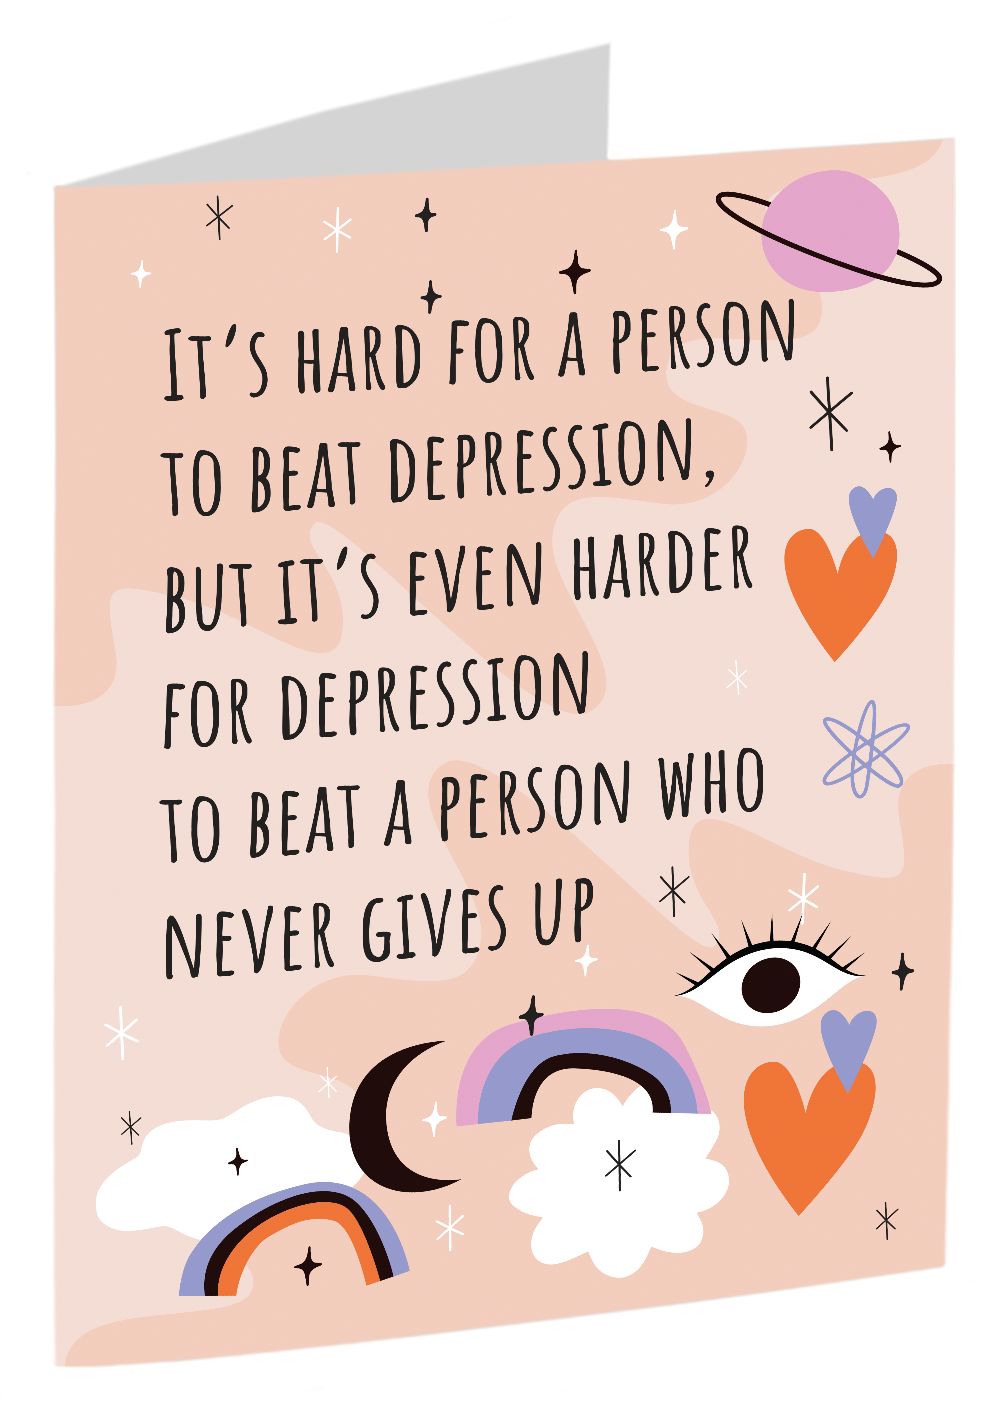 "It's Hard For Depression To Beat A Person Who Never Gives Up"